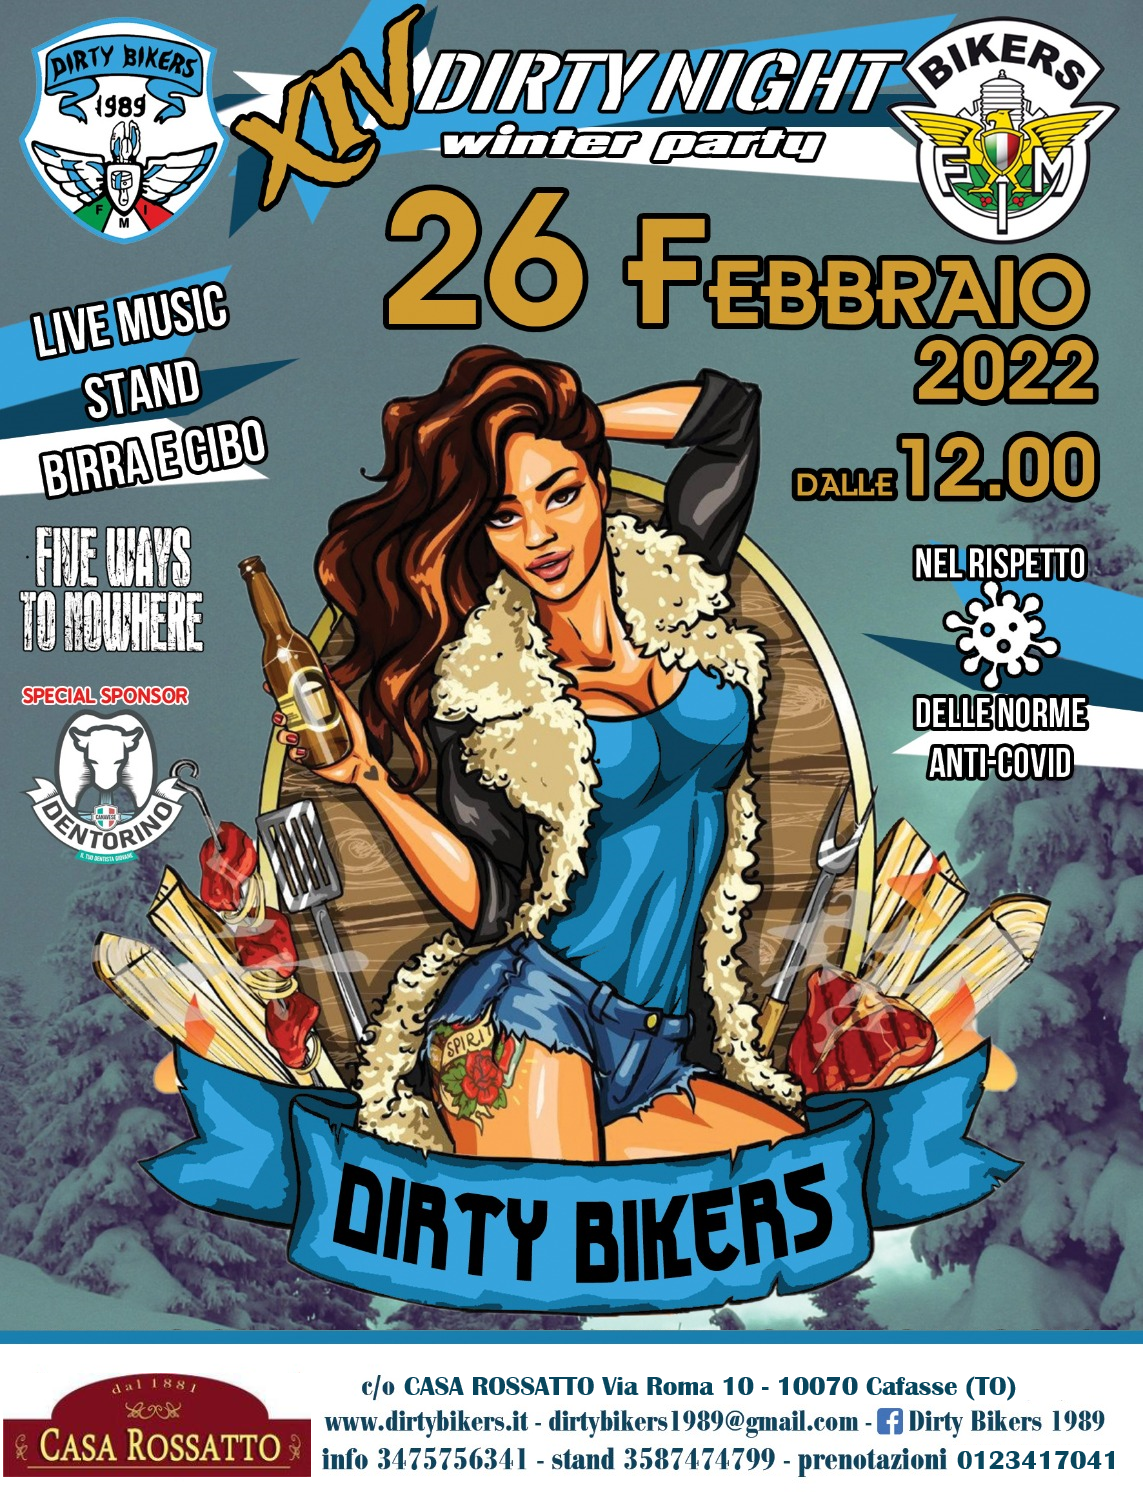 xiv-dirty-night-winter-party-2022-flyer